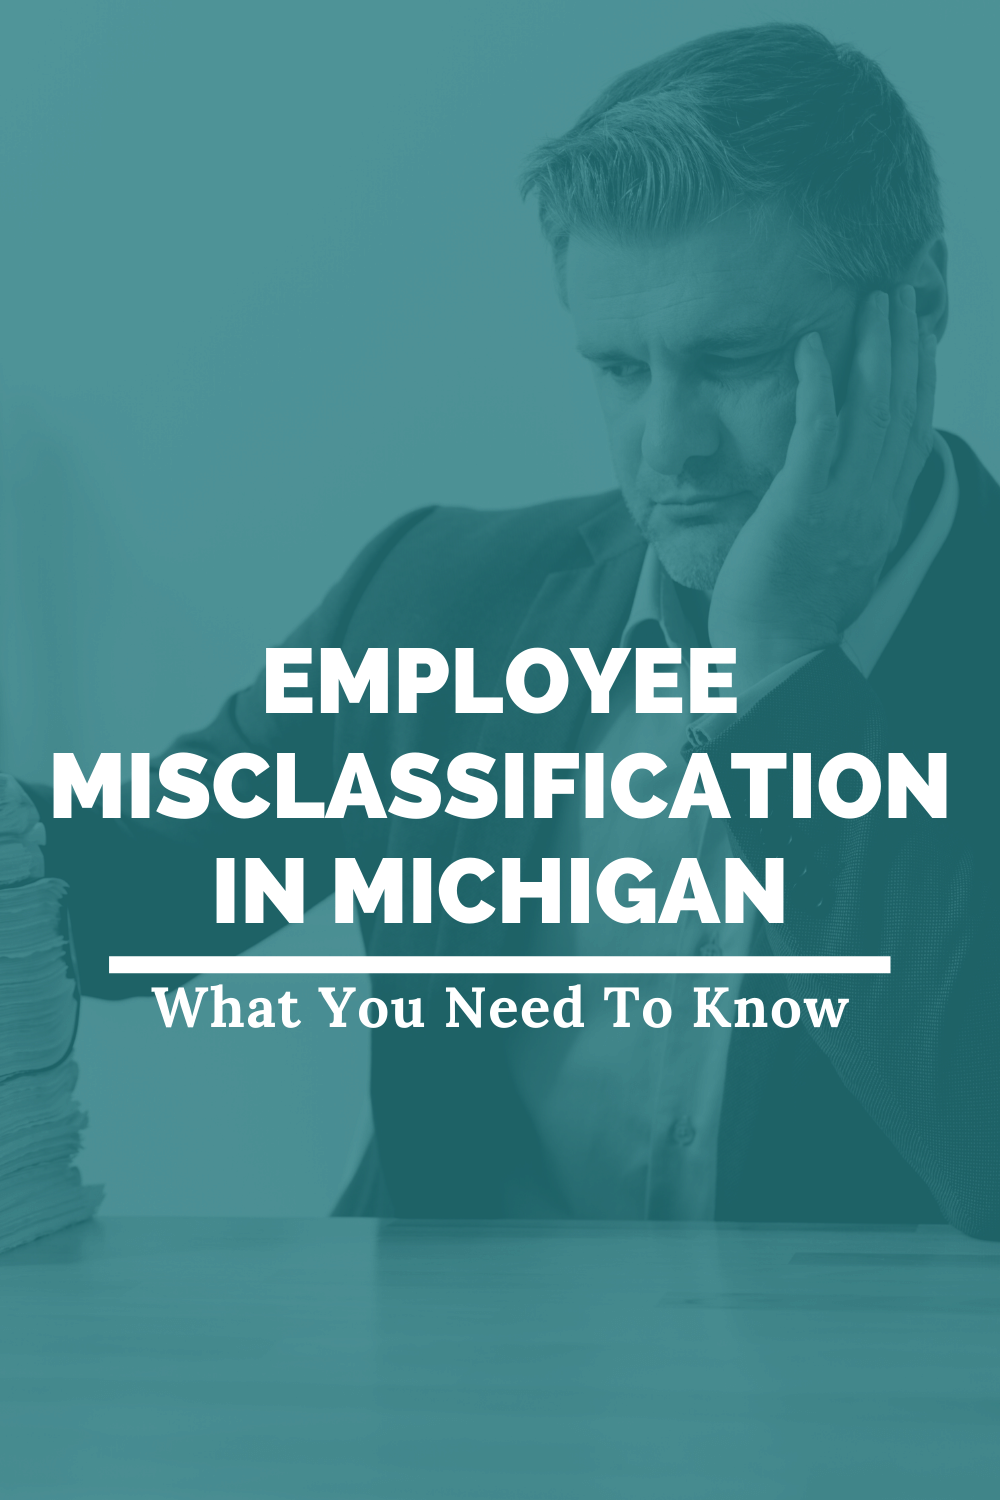 Employee Misclassification In Michigan: What You Need To Know